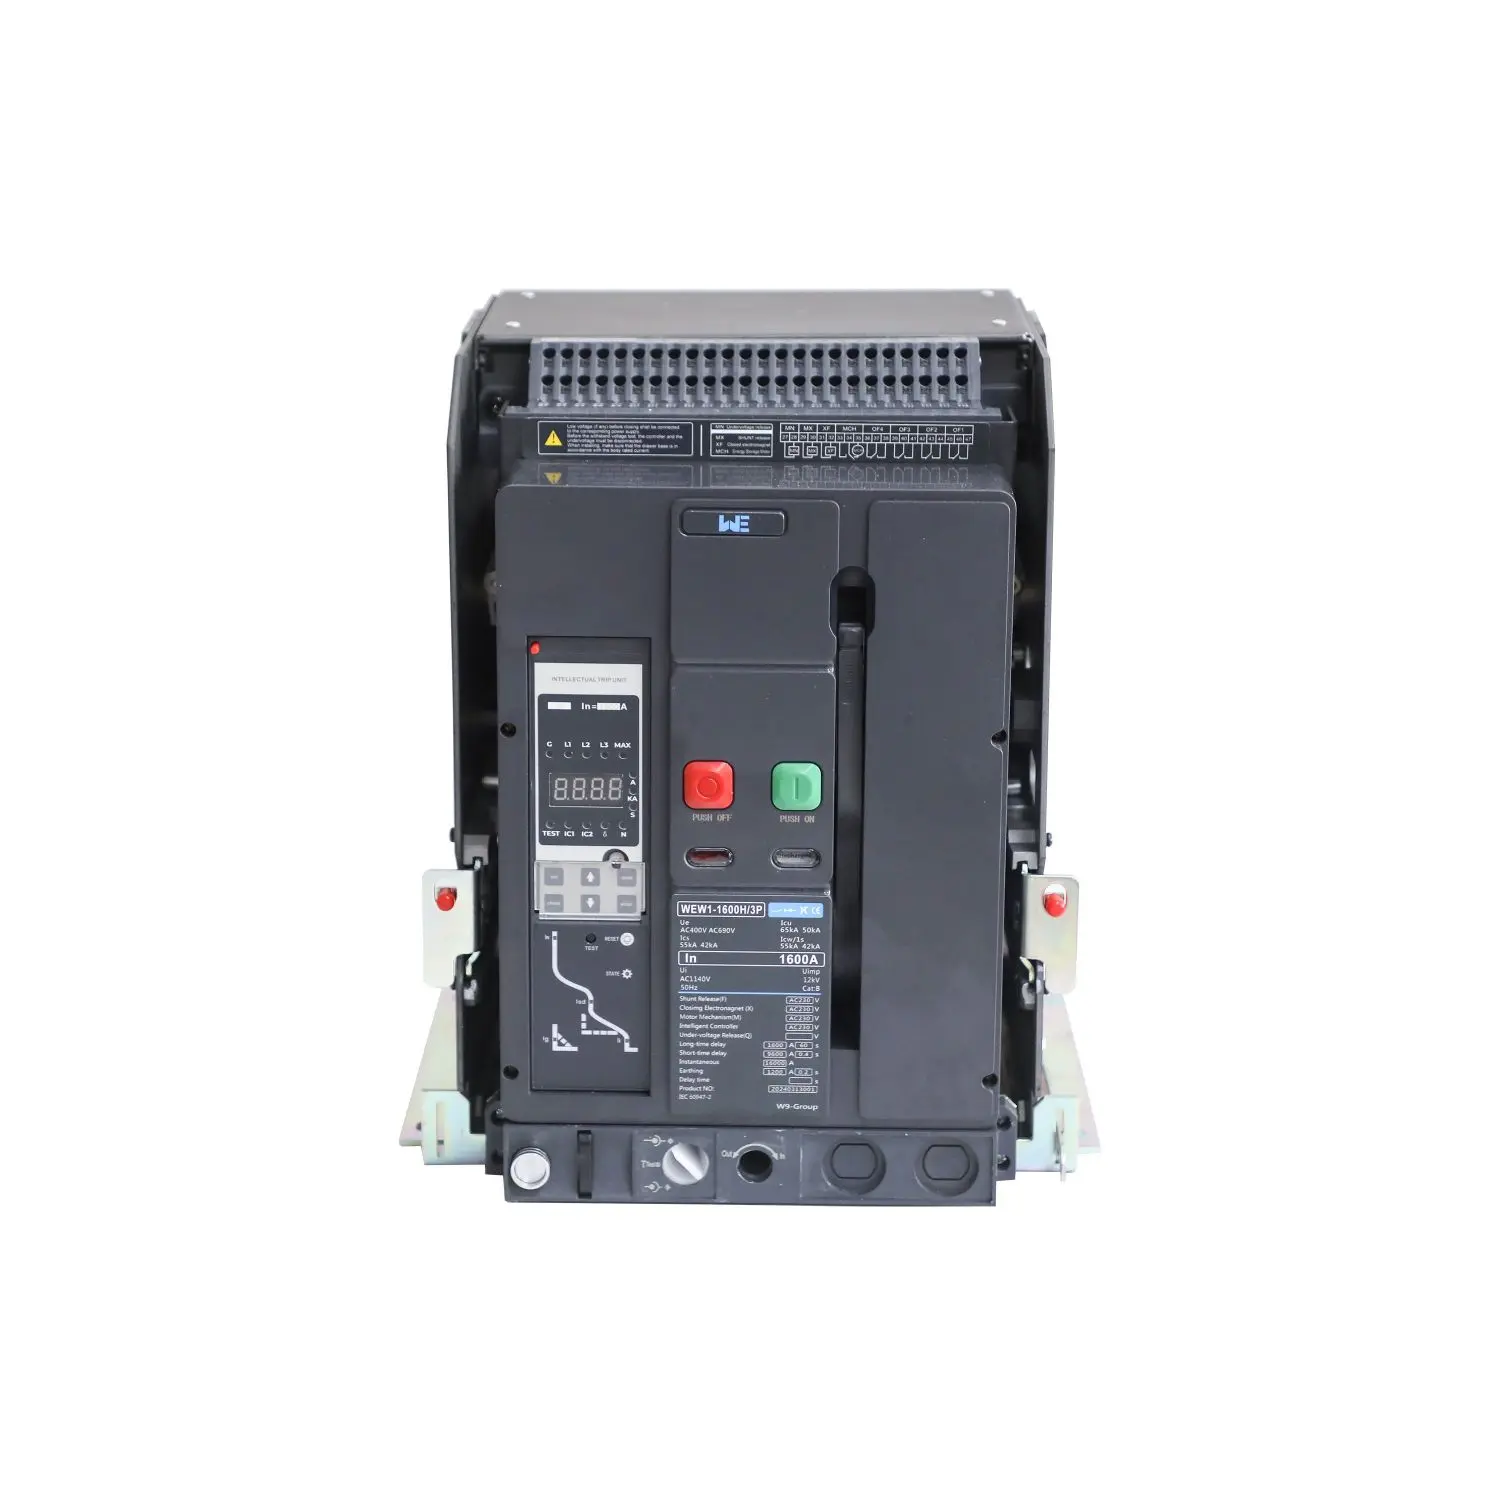 Learn about the versatility of the WEW1-1600 air circuit breaker   